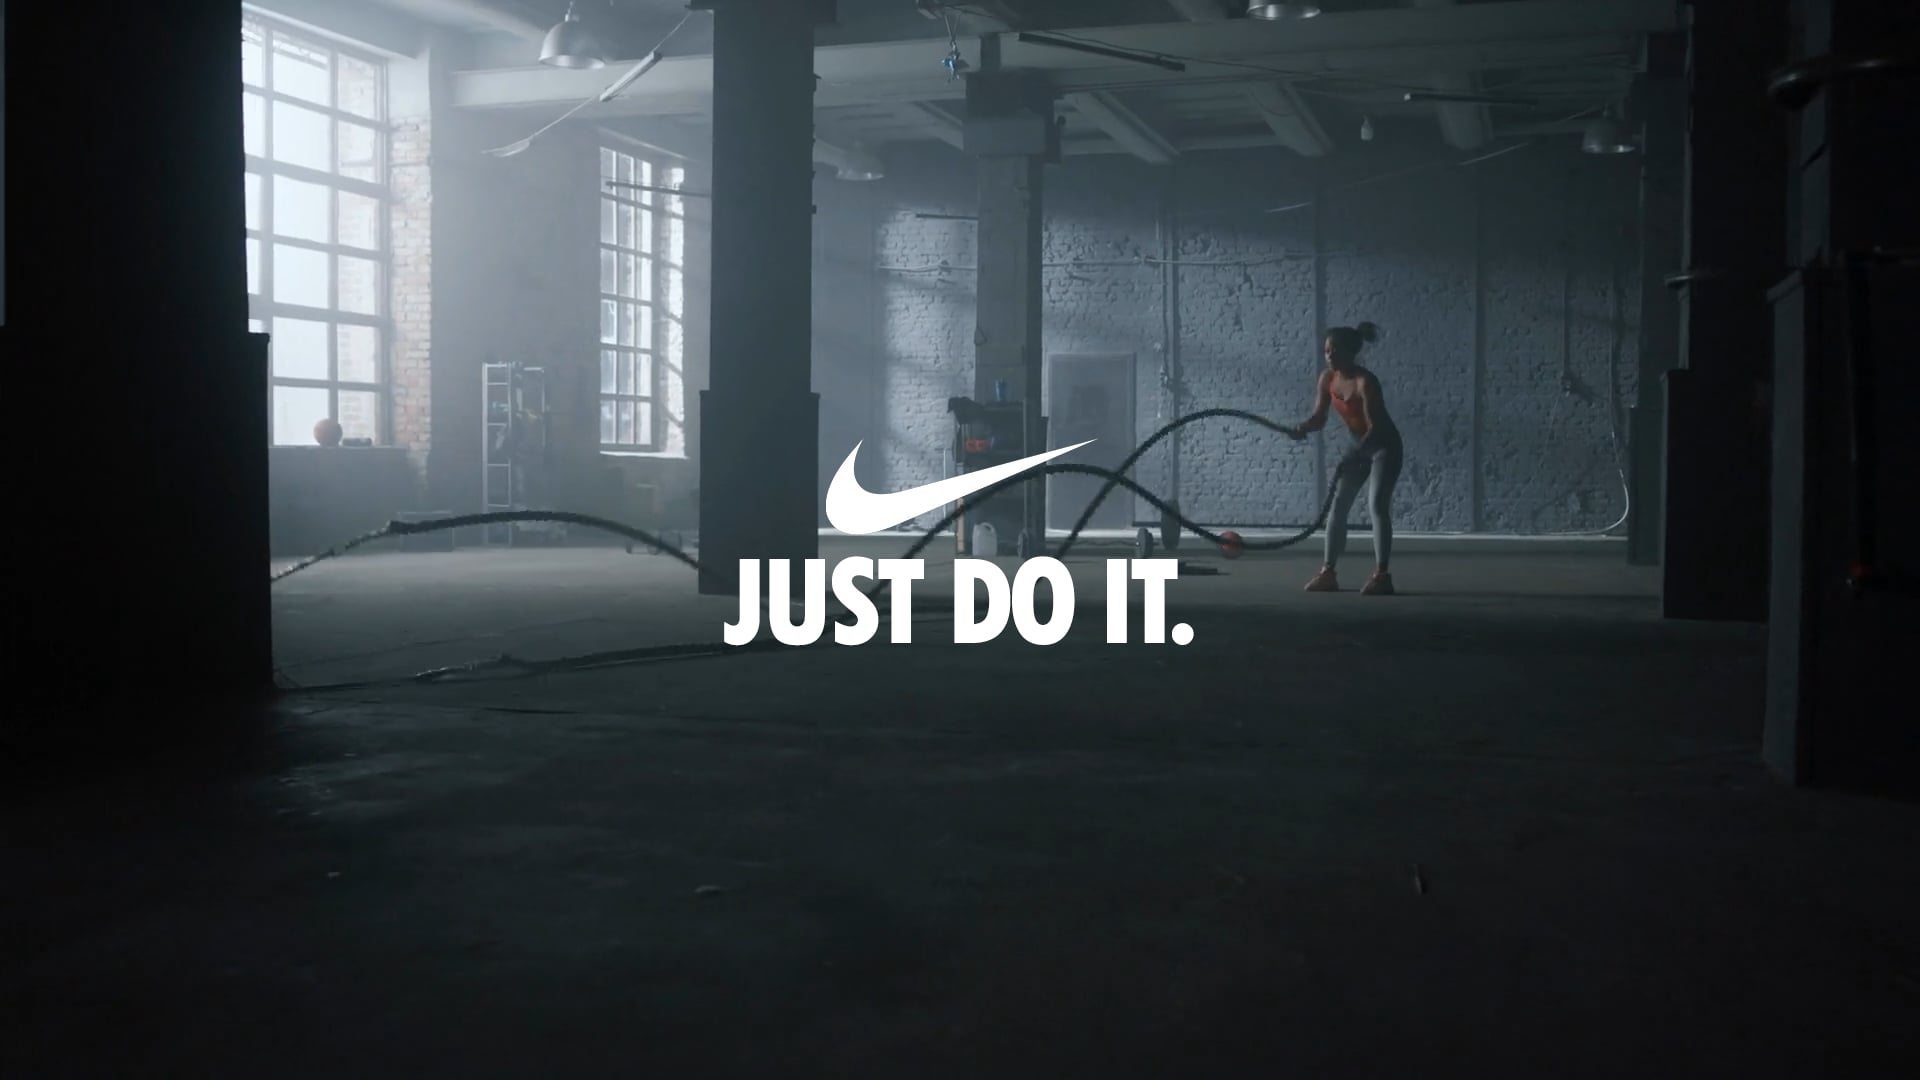 Commercial | Nike: Just Do It - Spec Ad (2022) On Vimeo